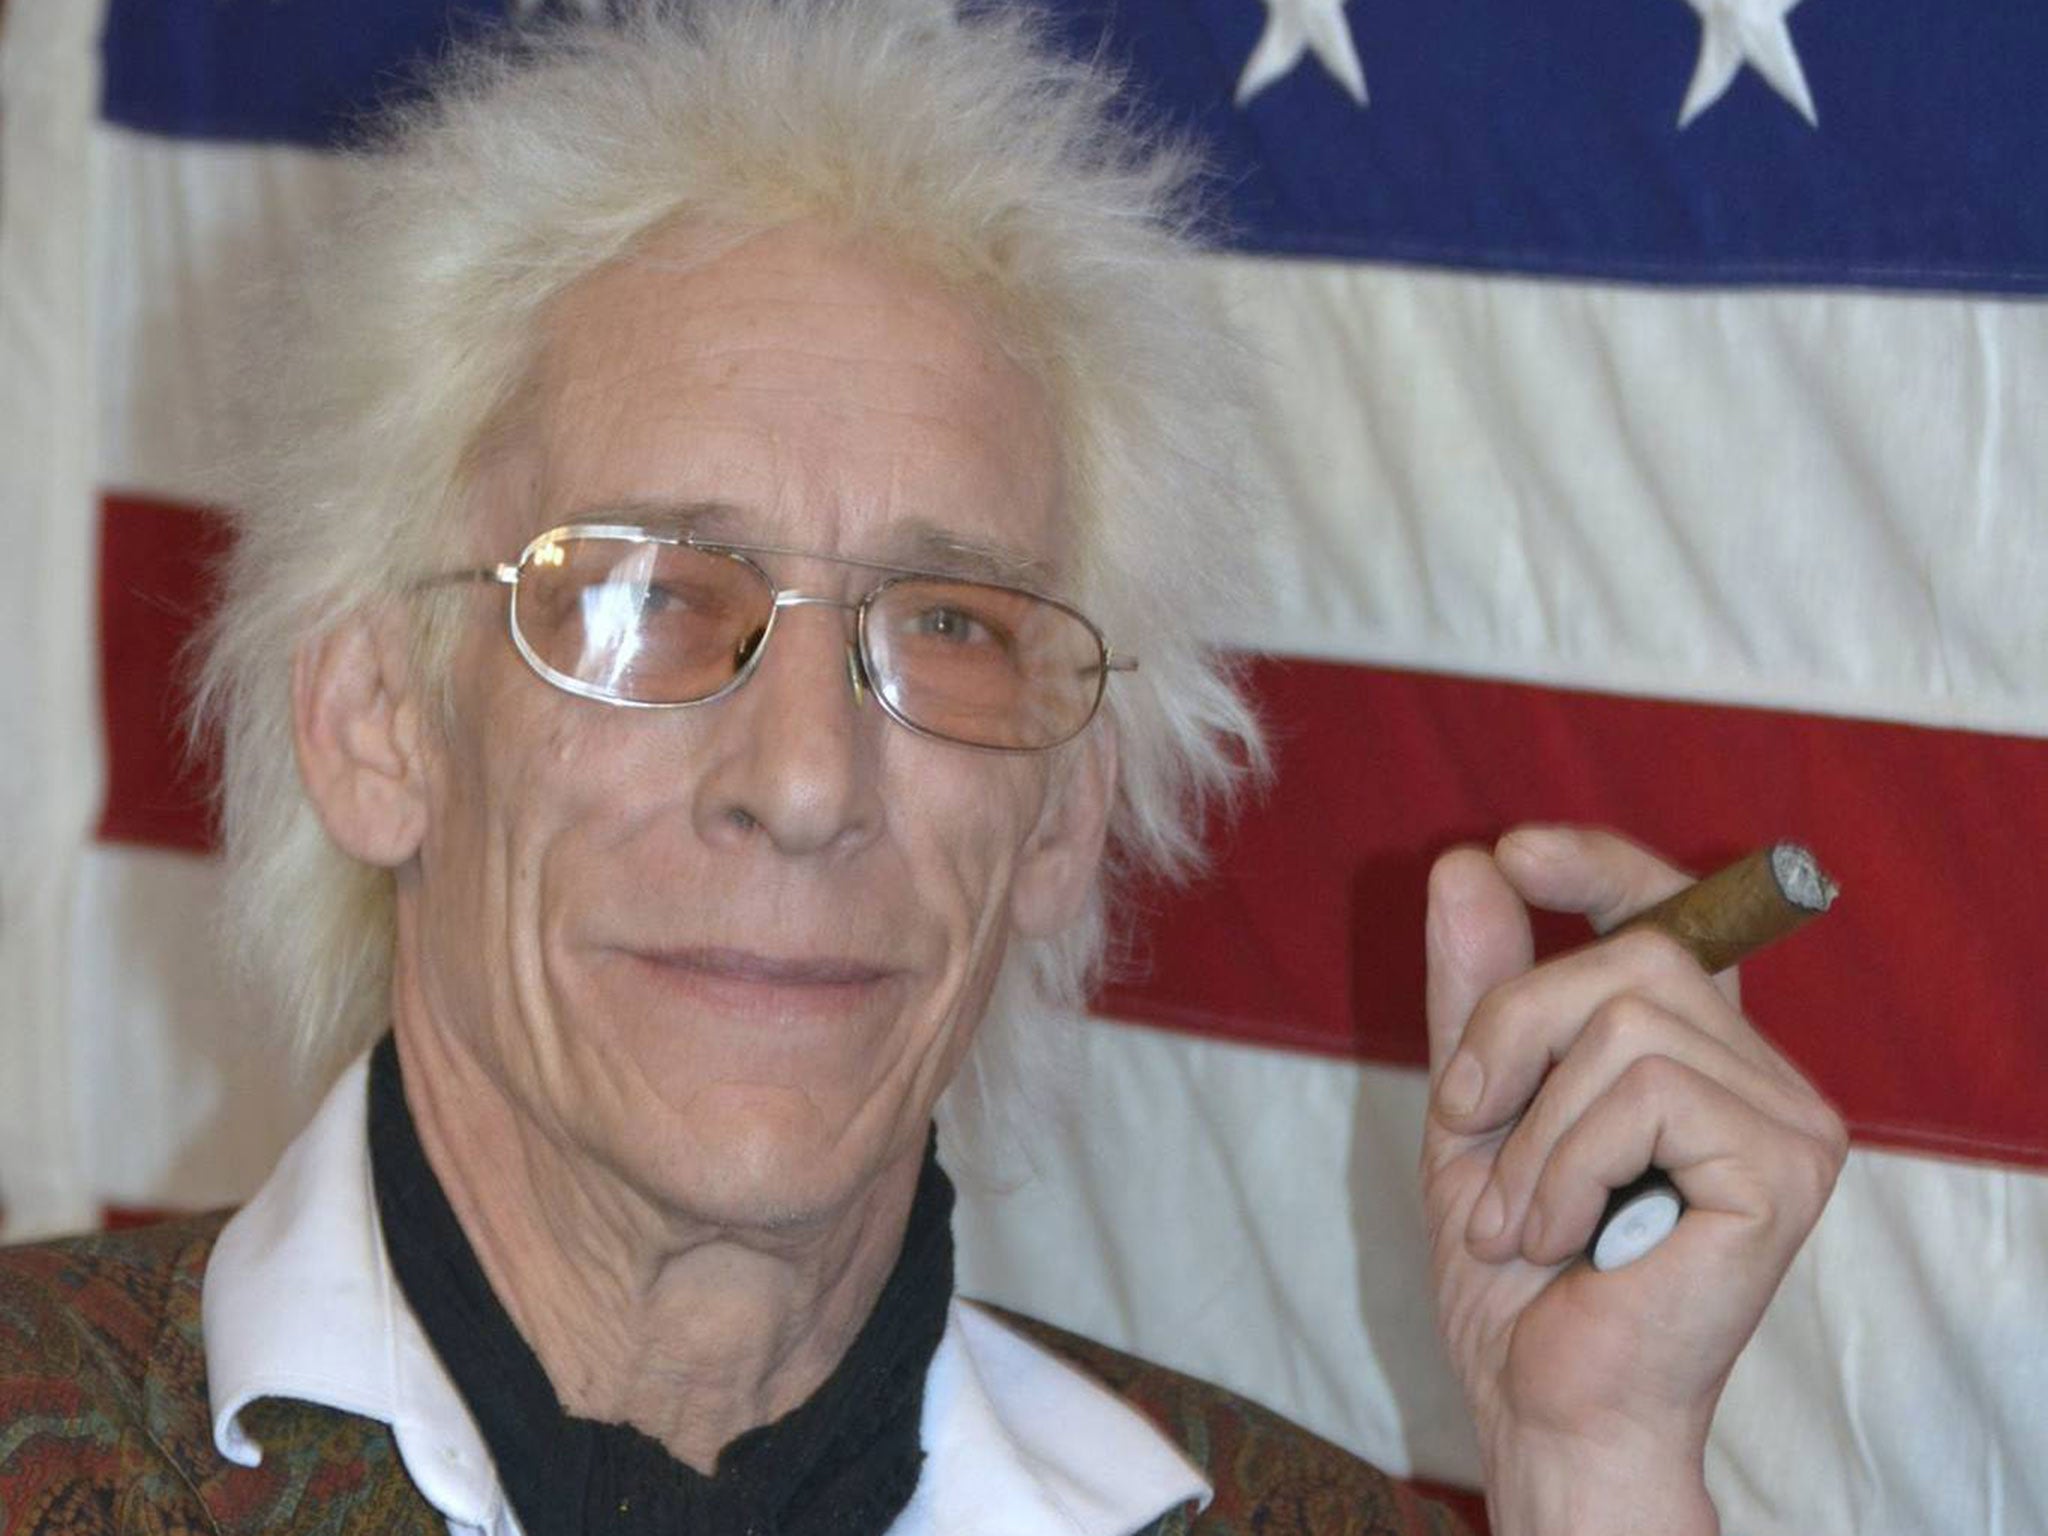 The Church of cannabis was founded by Bill Levin who is also the church's spiritual leader, the 'Grand Poobah'